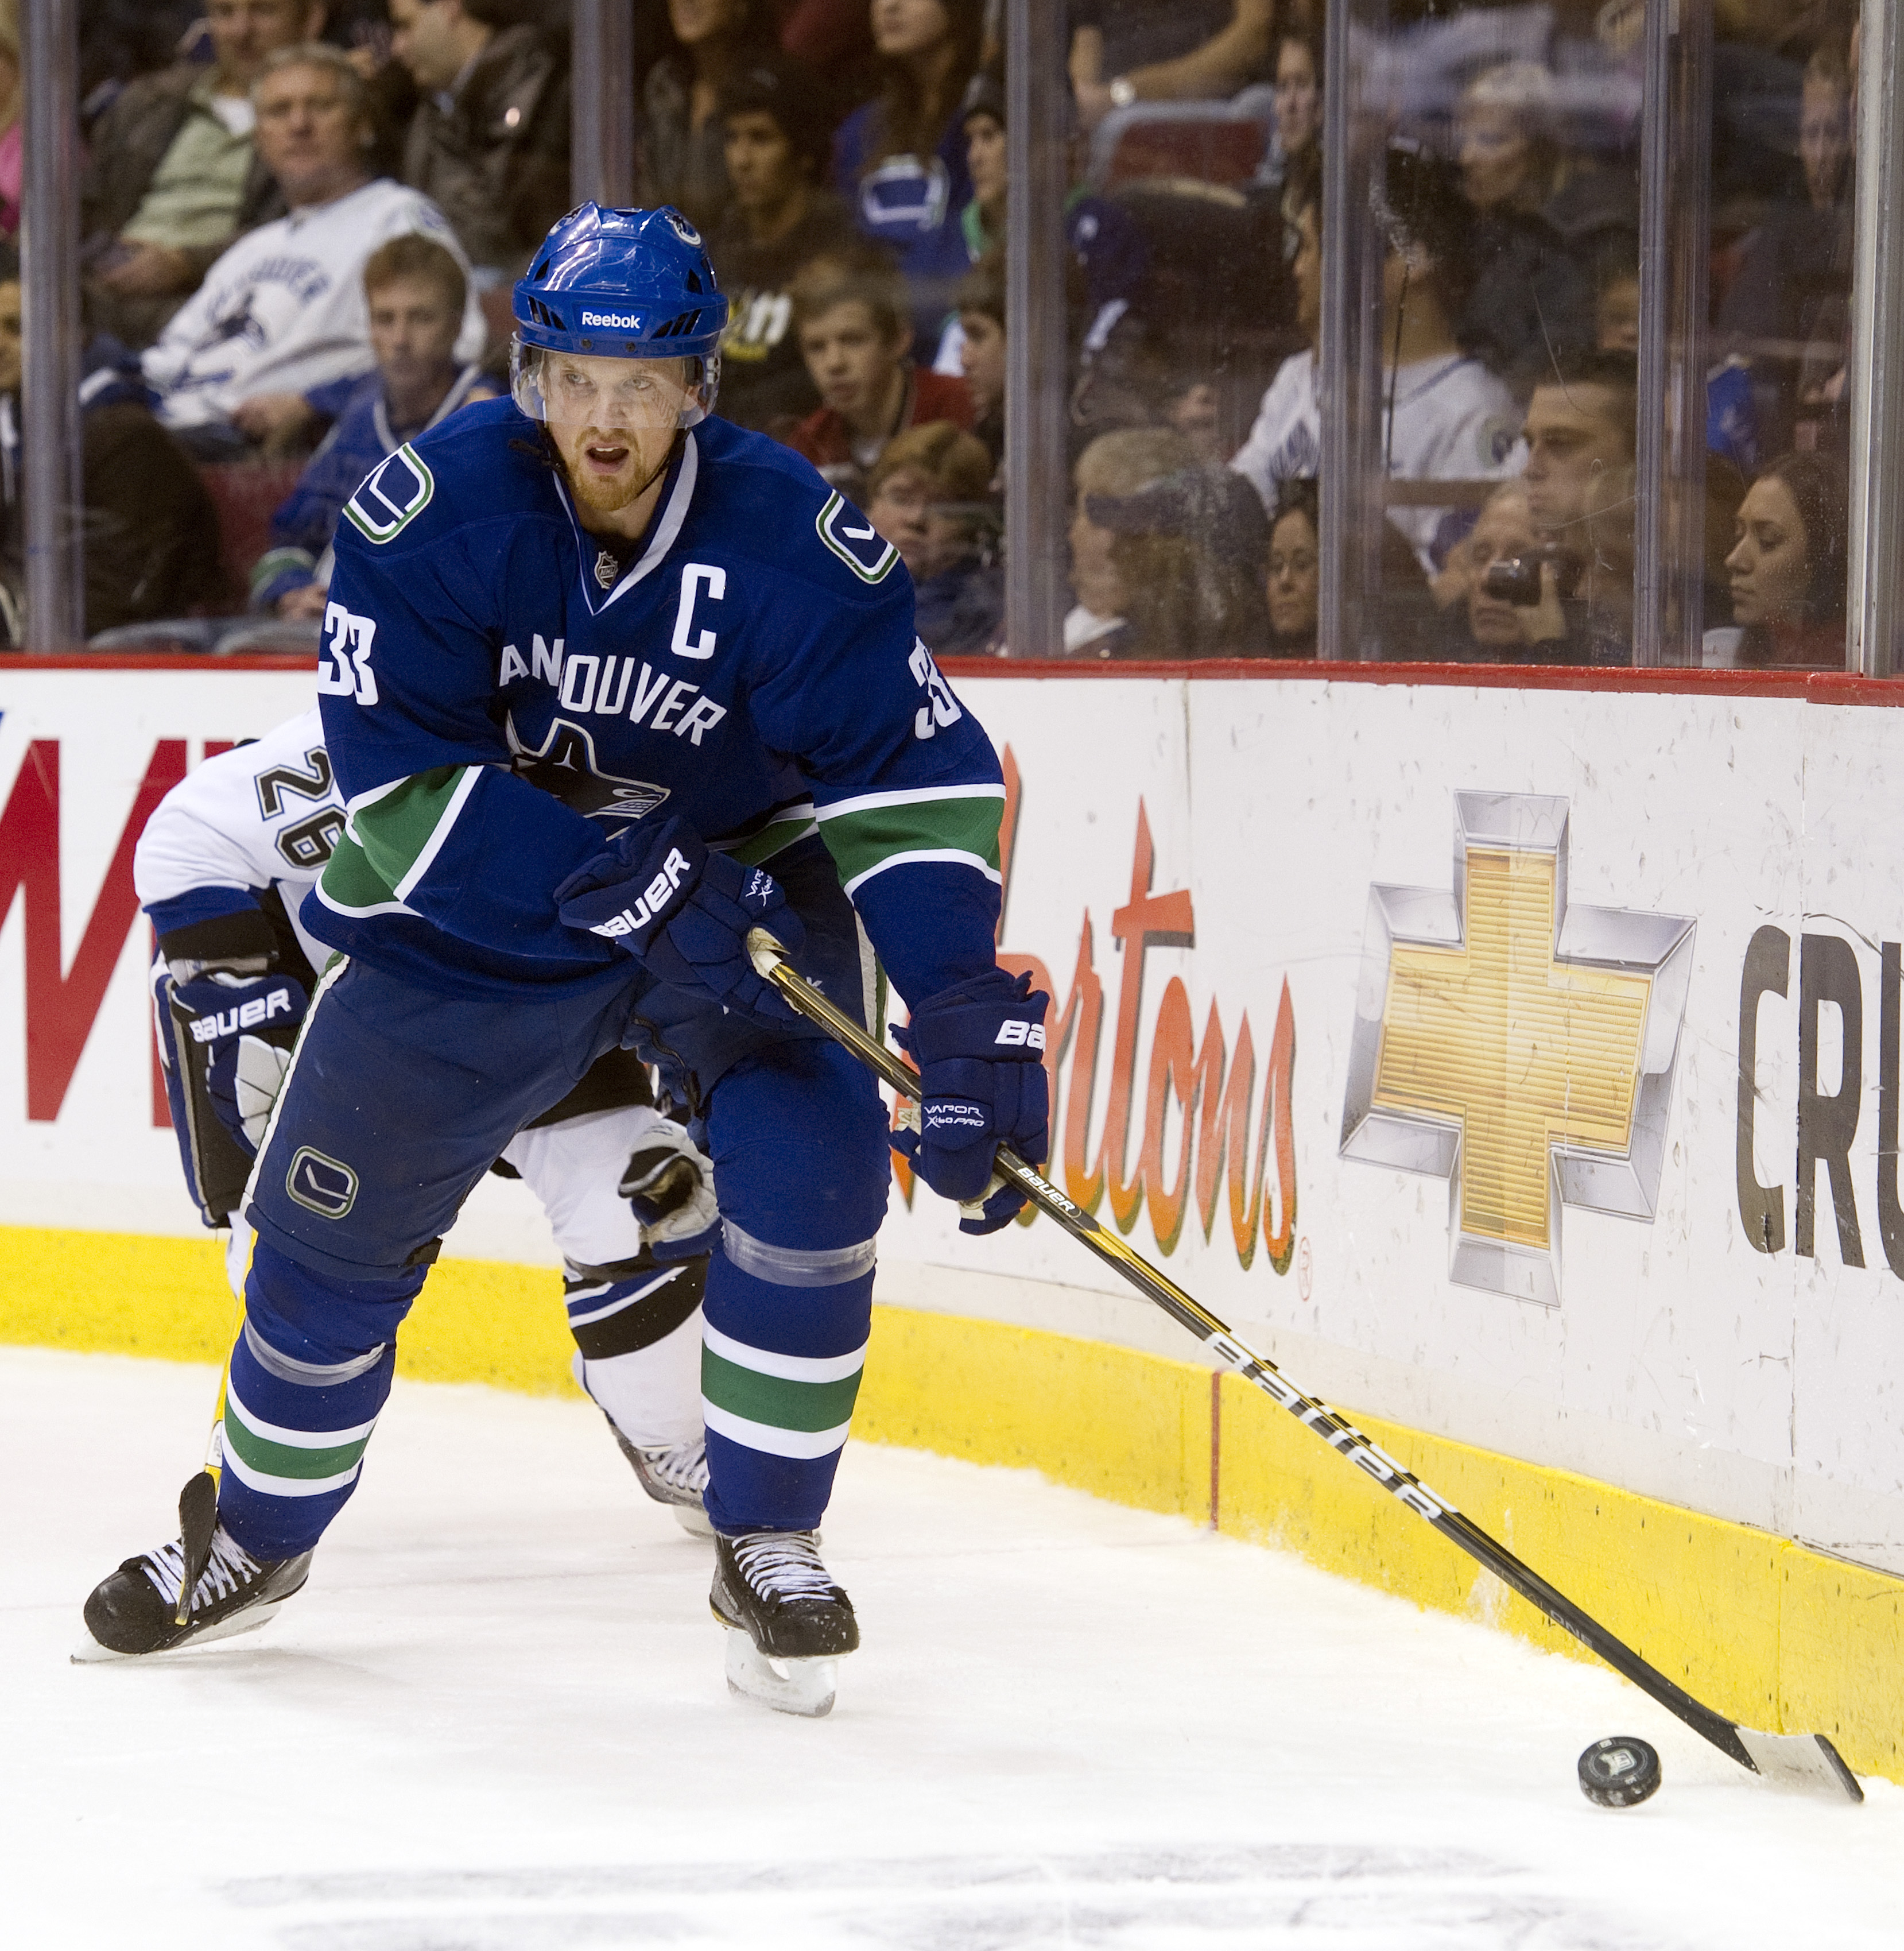 VANCOUVER, CANADA - DECEMBER 11: Henrik Sedin #33 of the Vancouver Canucks skates with the puck during NHL action on December 11, 2010 against the Tampa Bay Lightning at Rogers Arena in Vancouver, BC, Canada.  (Photo by Rich Lam/Getty Images)